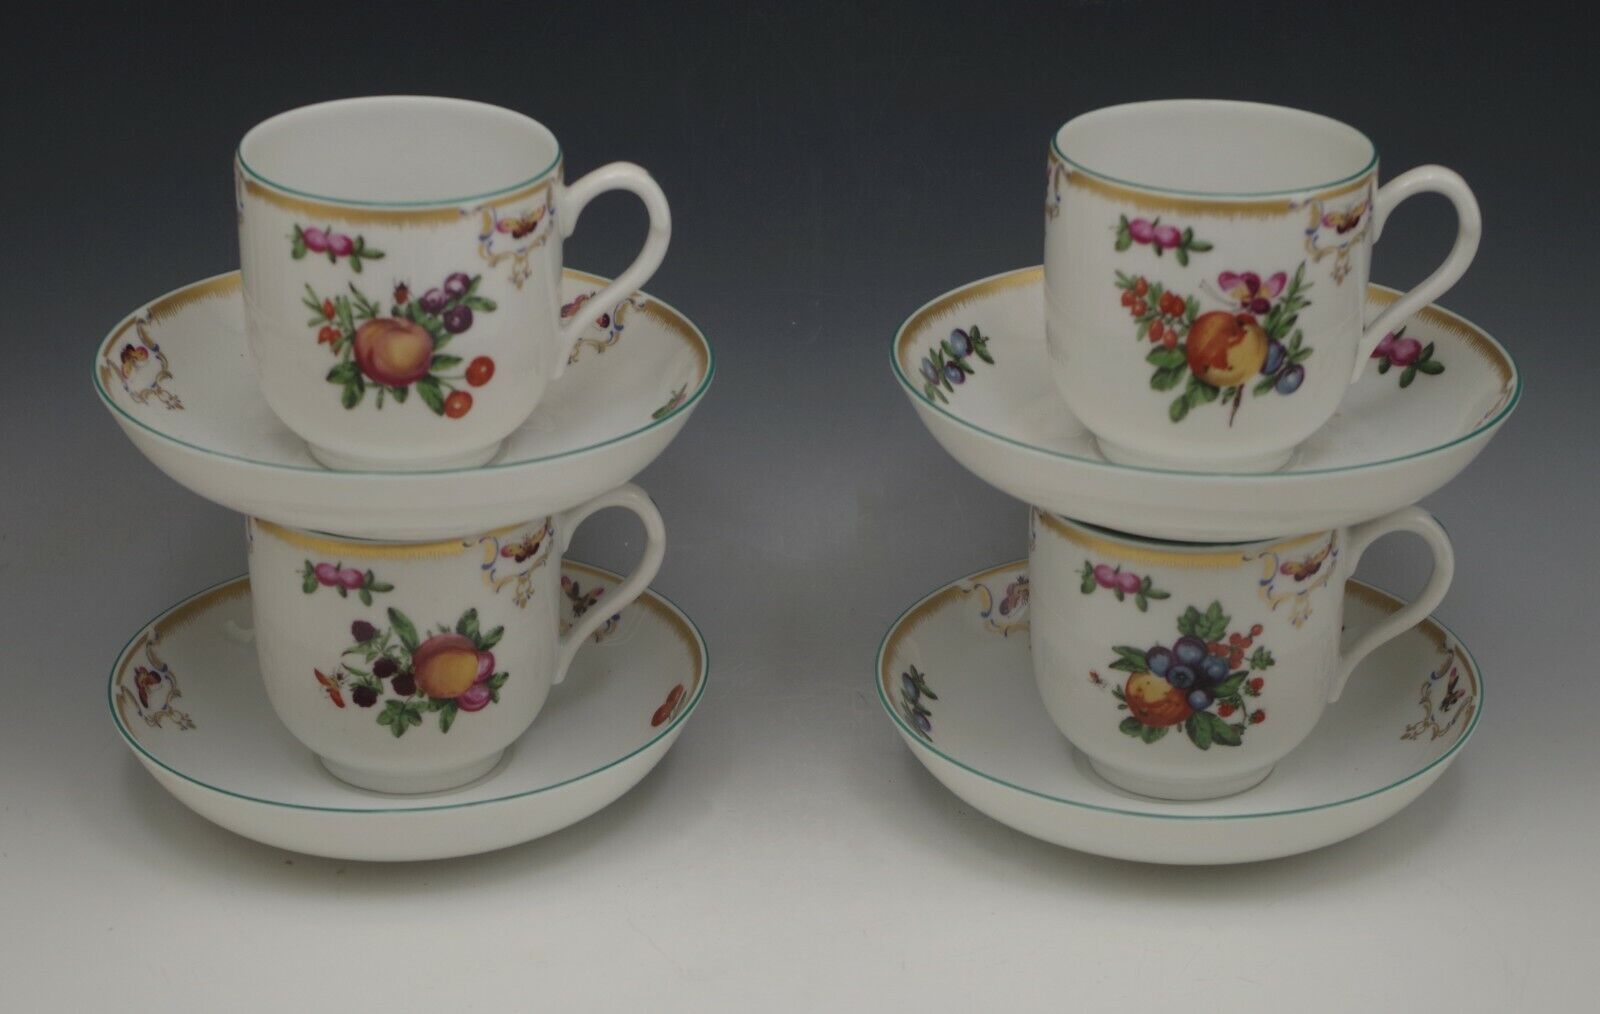  MOTTAHEDEH WILLIAMSBURG DUKE OF GLOUCESTER SET OF 4 CUPS AND SAUCERS NEW